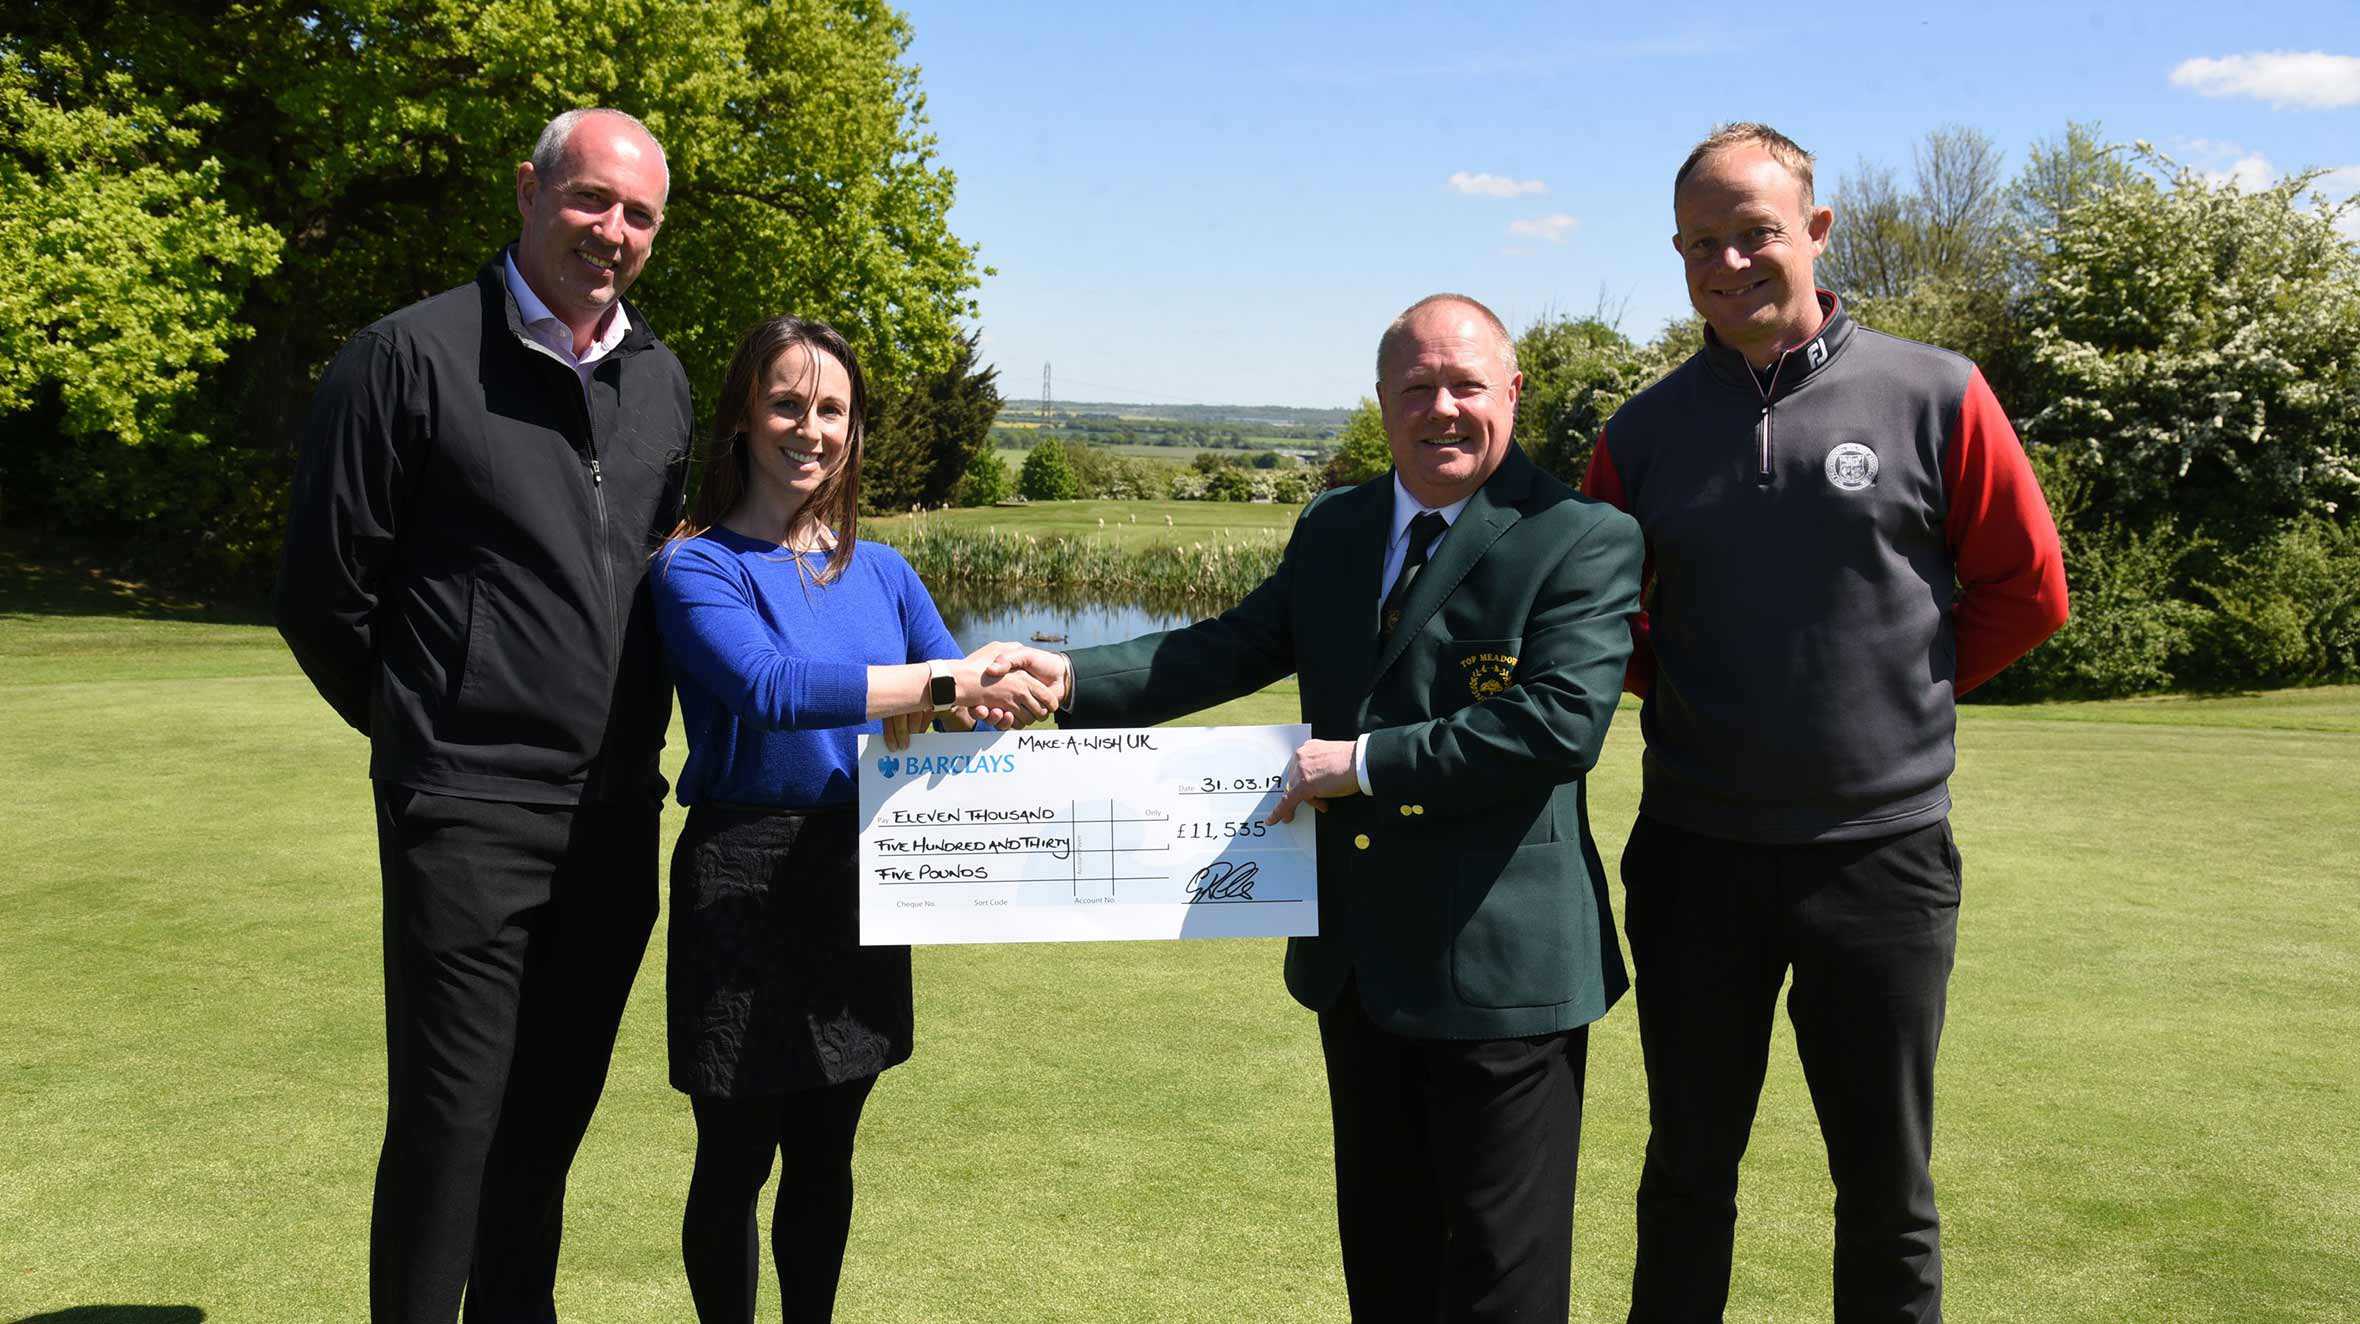 Graham Richards from Top Meadow Golf Club presenting a cheque to Danielle from Make-A-Wish UK